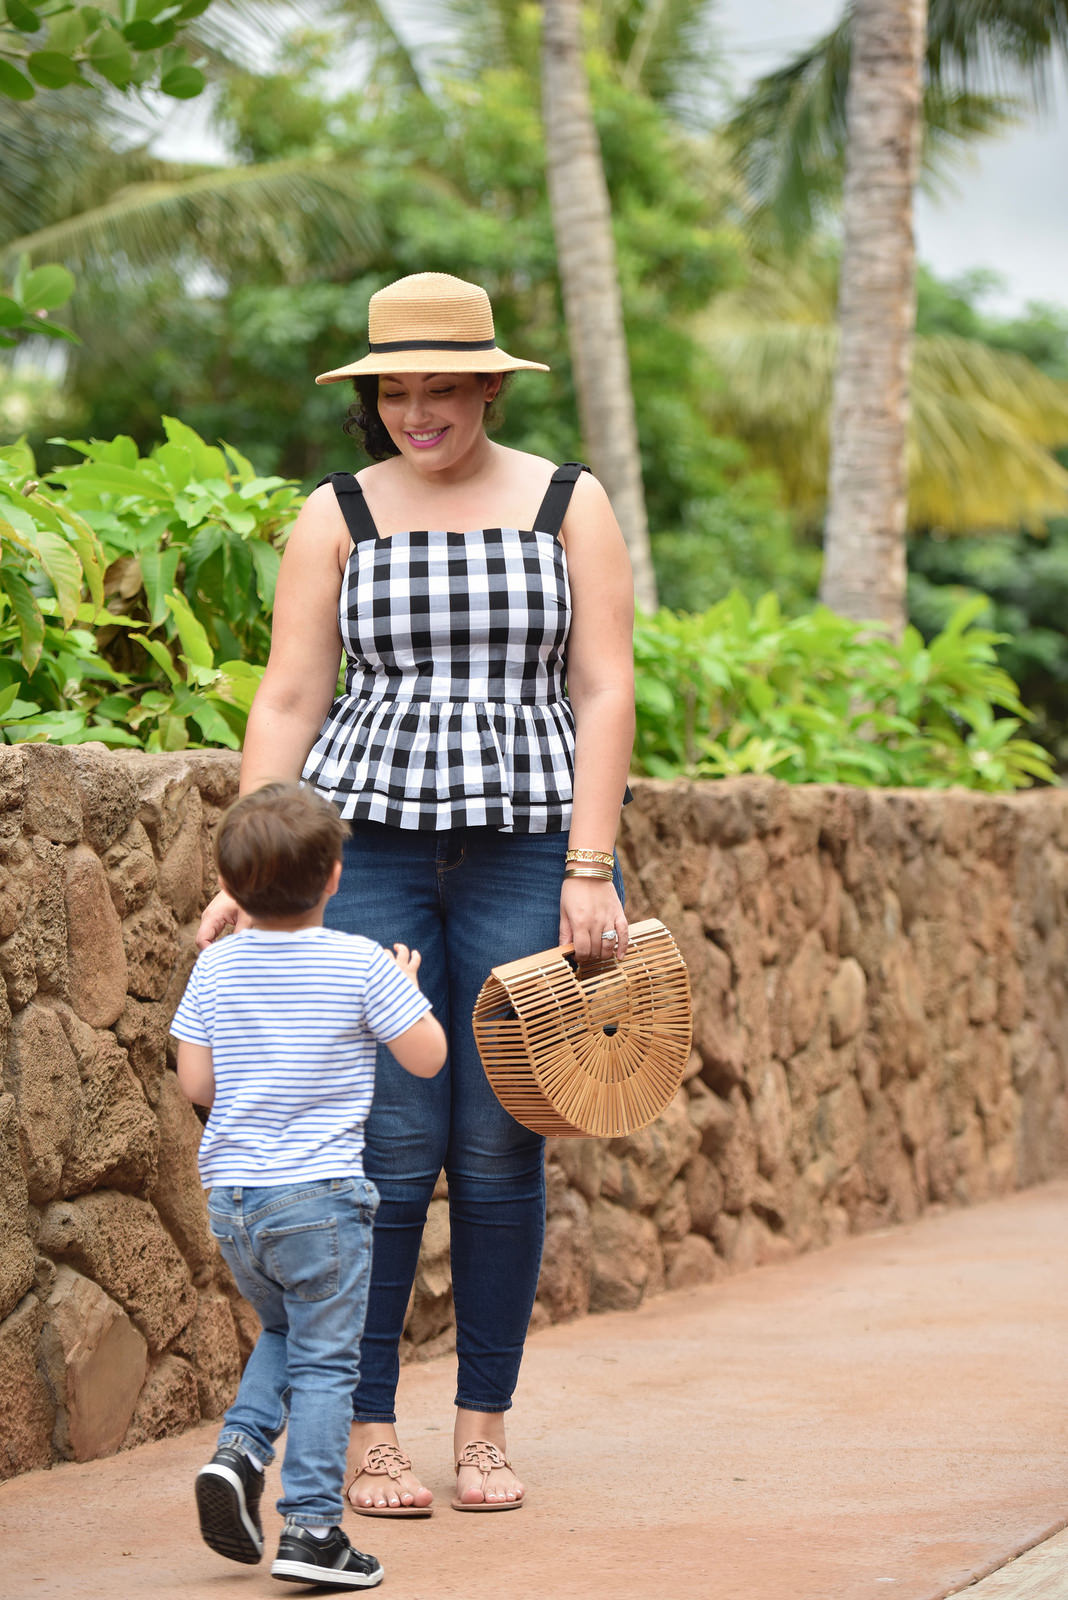 Girl With Curves blogger Tanesha Awasthi wears a gingham peplum and boater hat in Hawaii with her son Narayan.